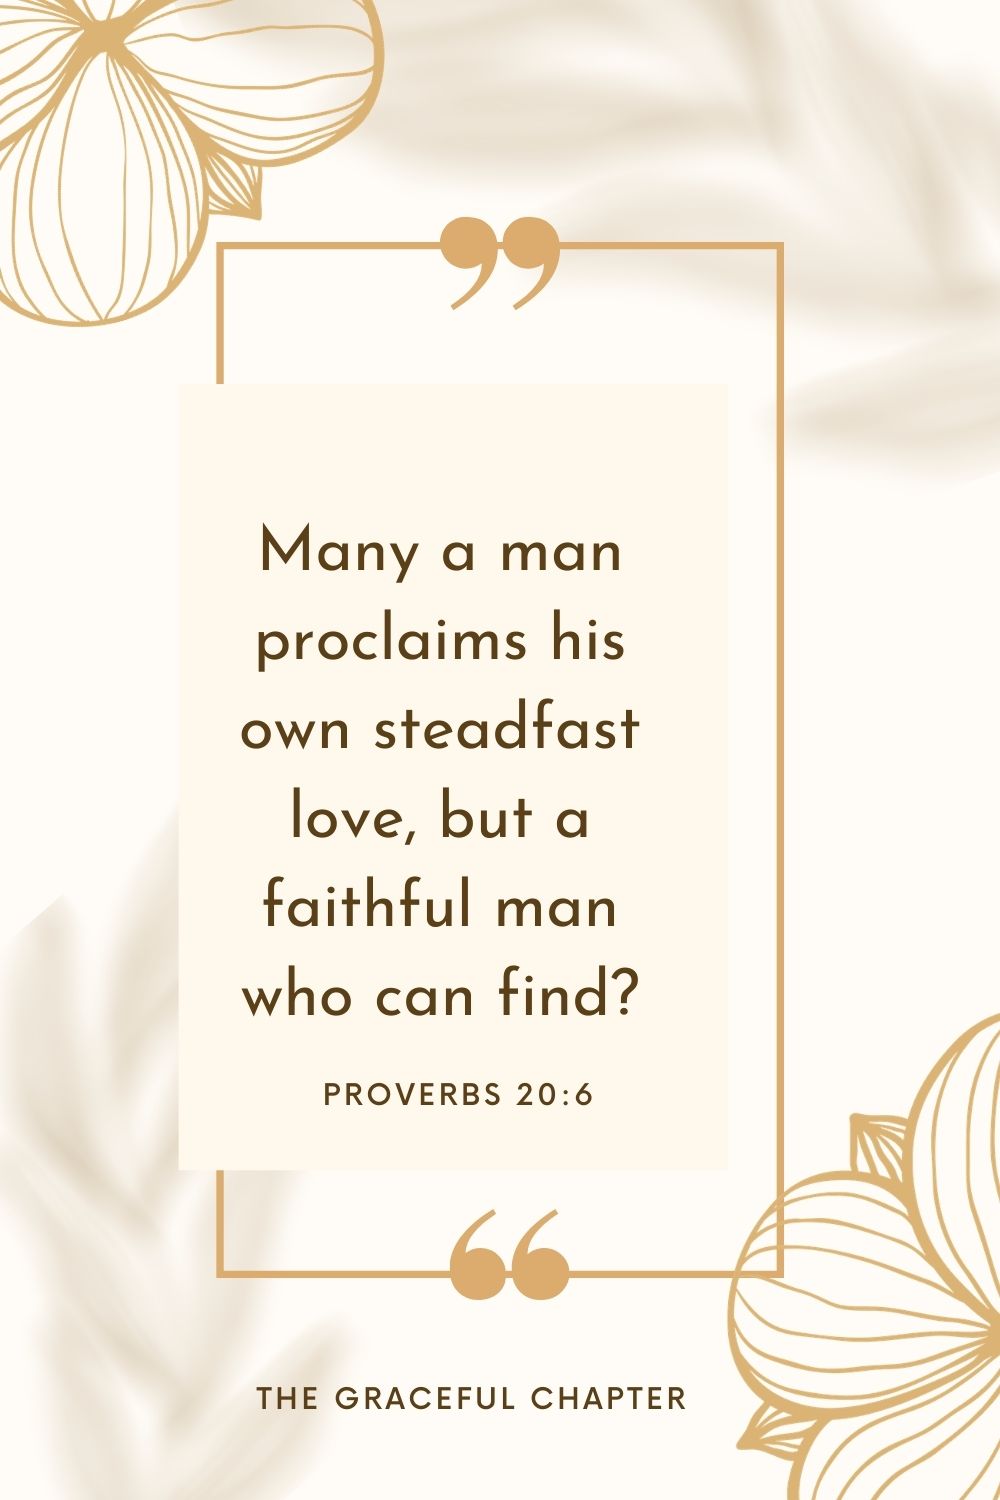 Many a man proclaims his own steadfast love, but a faithful man who can find? Proverbs 20:6